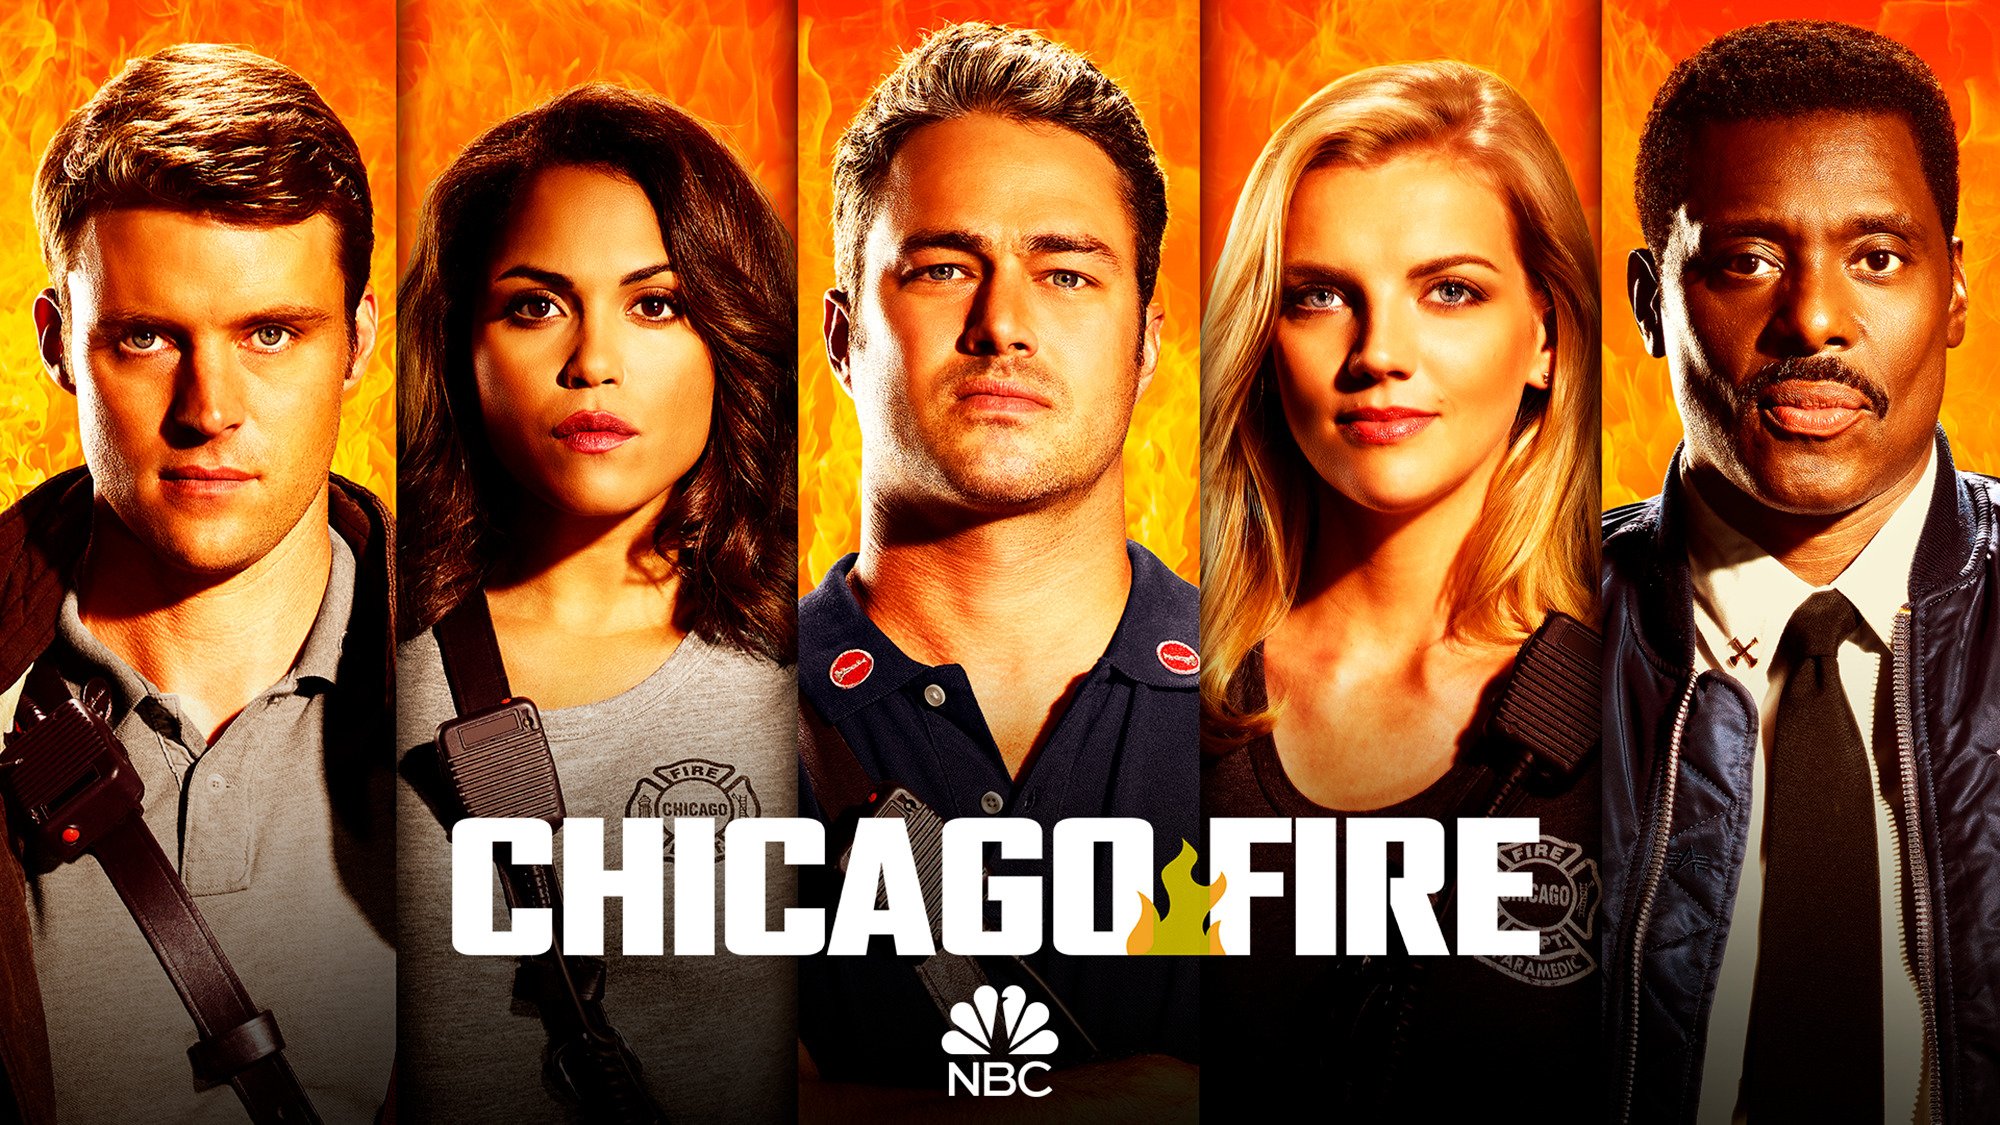 are any of the cast of chicago fire real firefighters